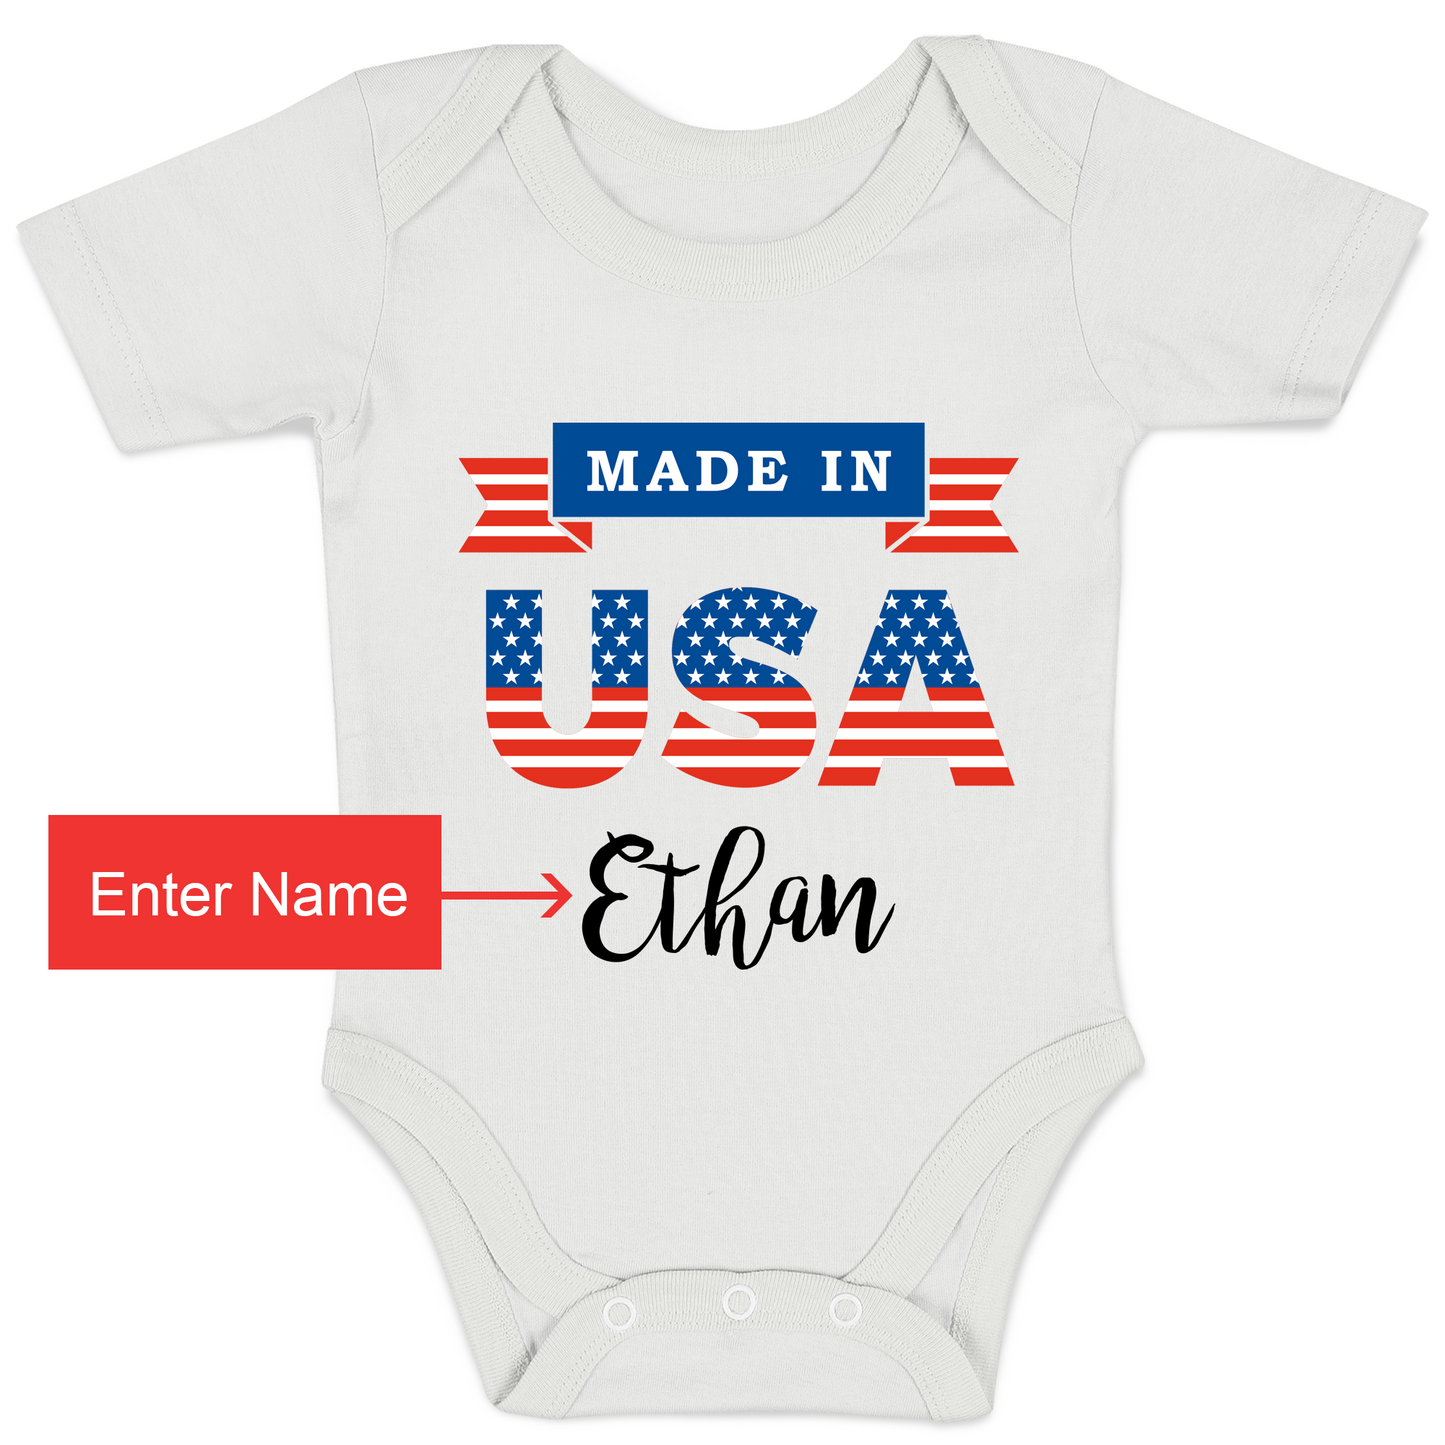 Personalized Organic Baby Bodysuit - Made in U.S.A (White / Short Sleeve)